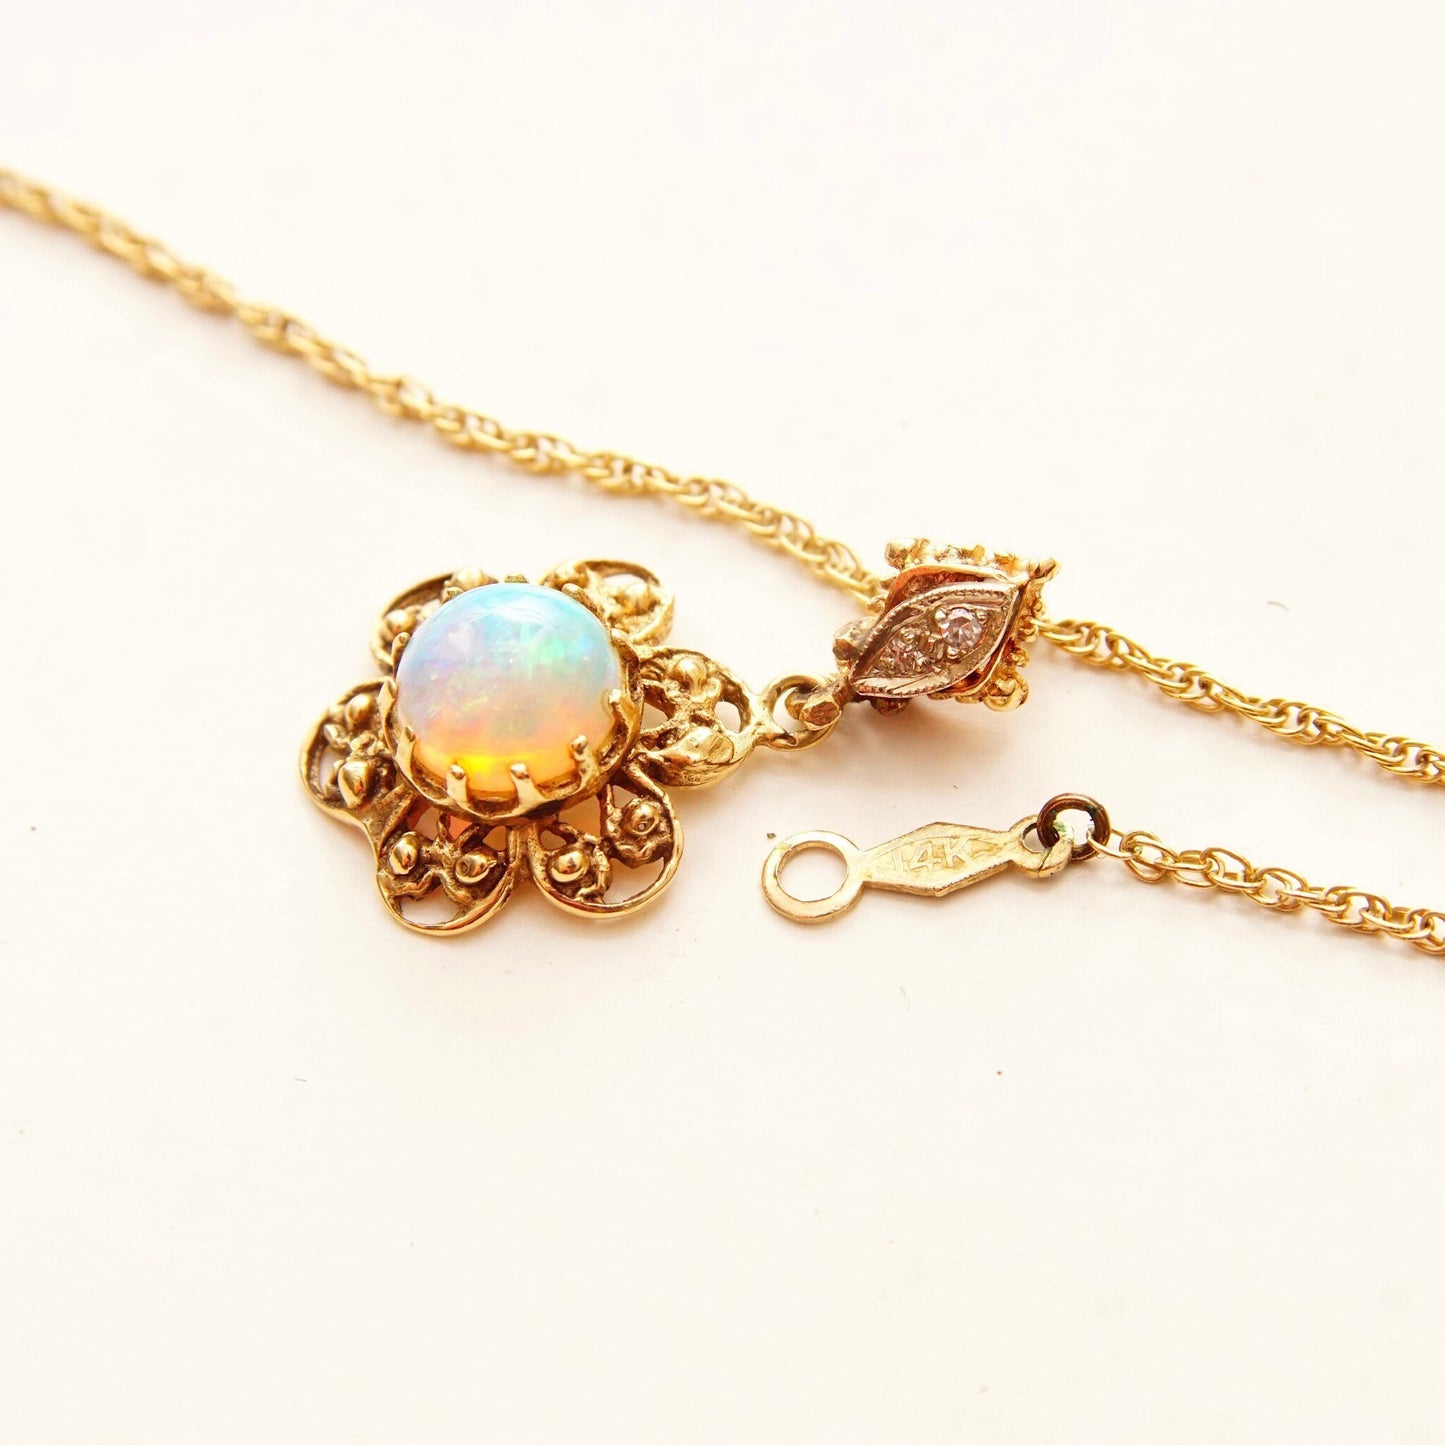 14K gold filigree flower pendant necklace with opal cabochon center stone and diamond accents on bail, featuring delicate 1.5mm rope chain, 21 inches long.